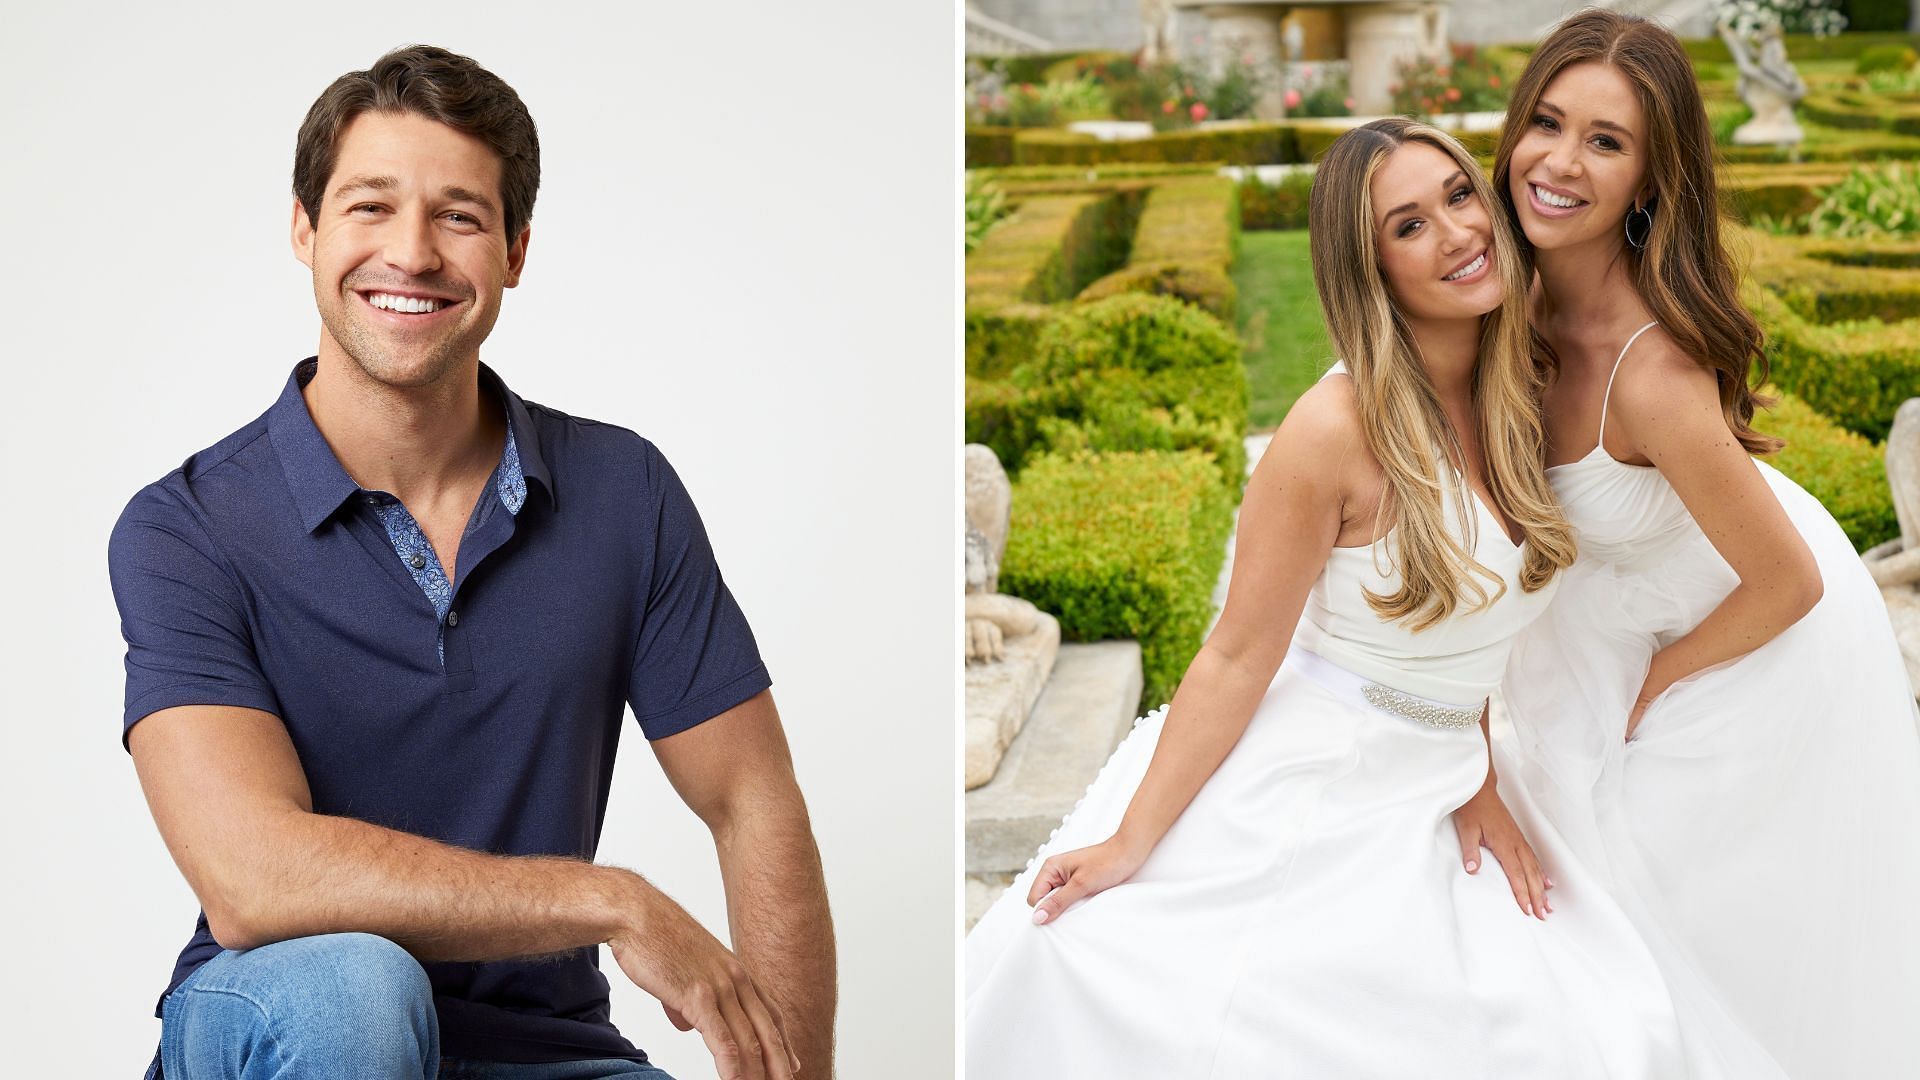 Fans slam Hayden after his remarks about Rachel and Gabby on The Bachelorette (Image via ABC/Ricky Middlesworth, Craig Sjodin)